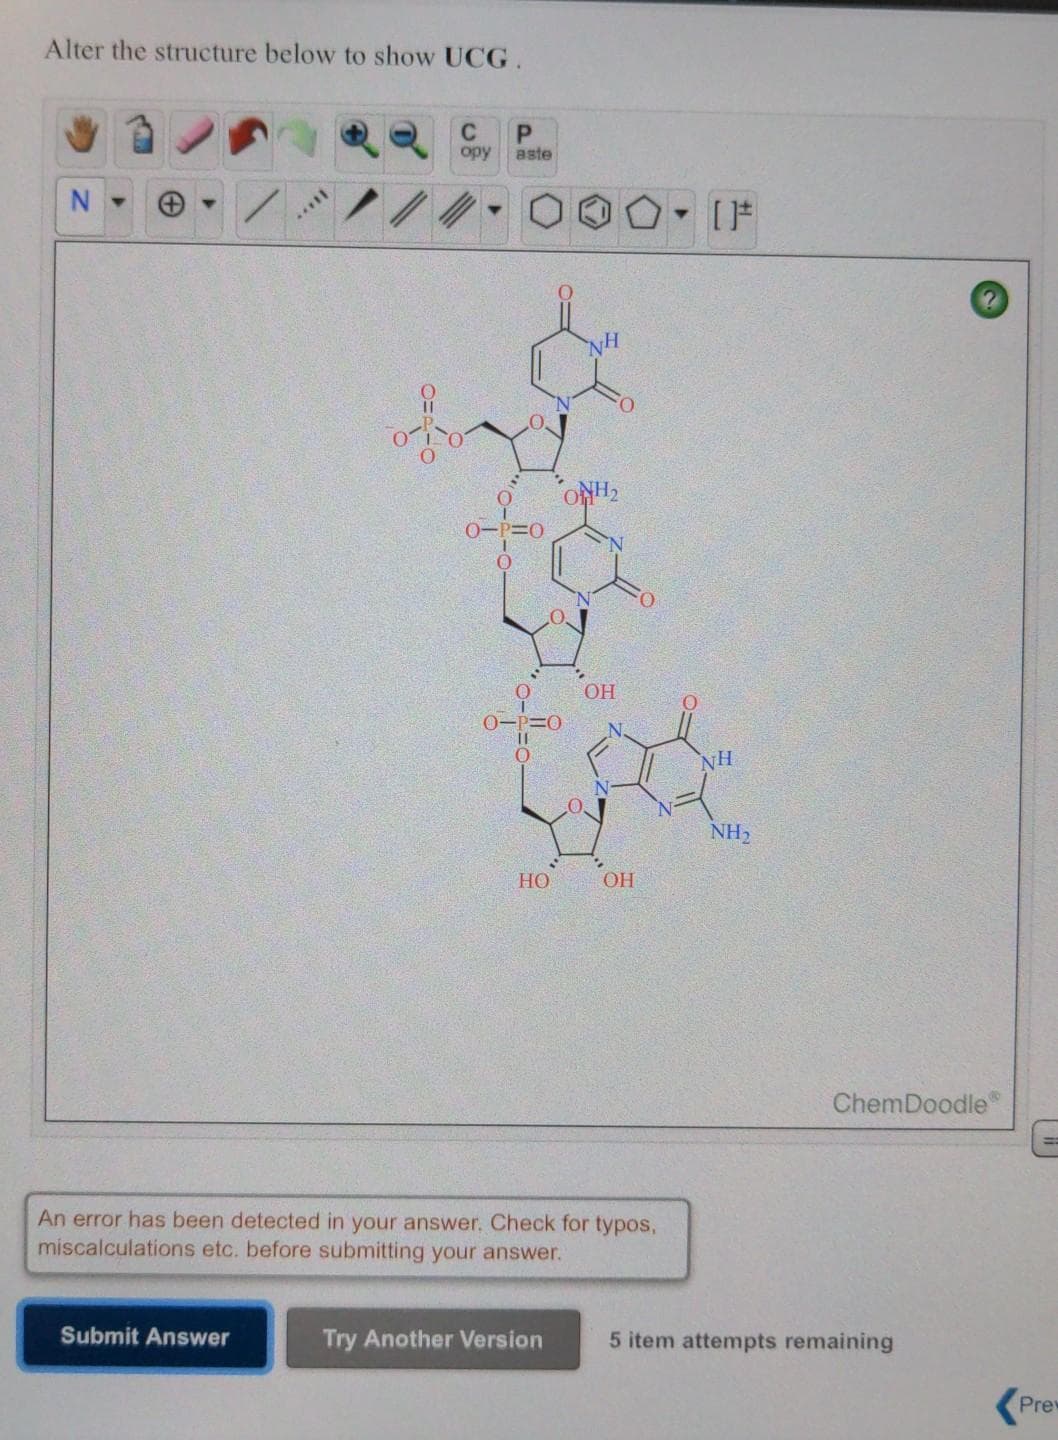 Alter the structure below to show UCG.
C
opy
aste
ONH,
NH
NH2
HO
OH
ChemDoodle
An error has been detected in your answer. Check for typos,
miscalculations etc. before submitting your answer.
Submit Answer
Try Another Version
5 item attempts remaining
Prew
